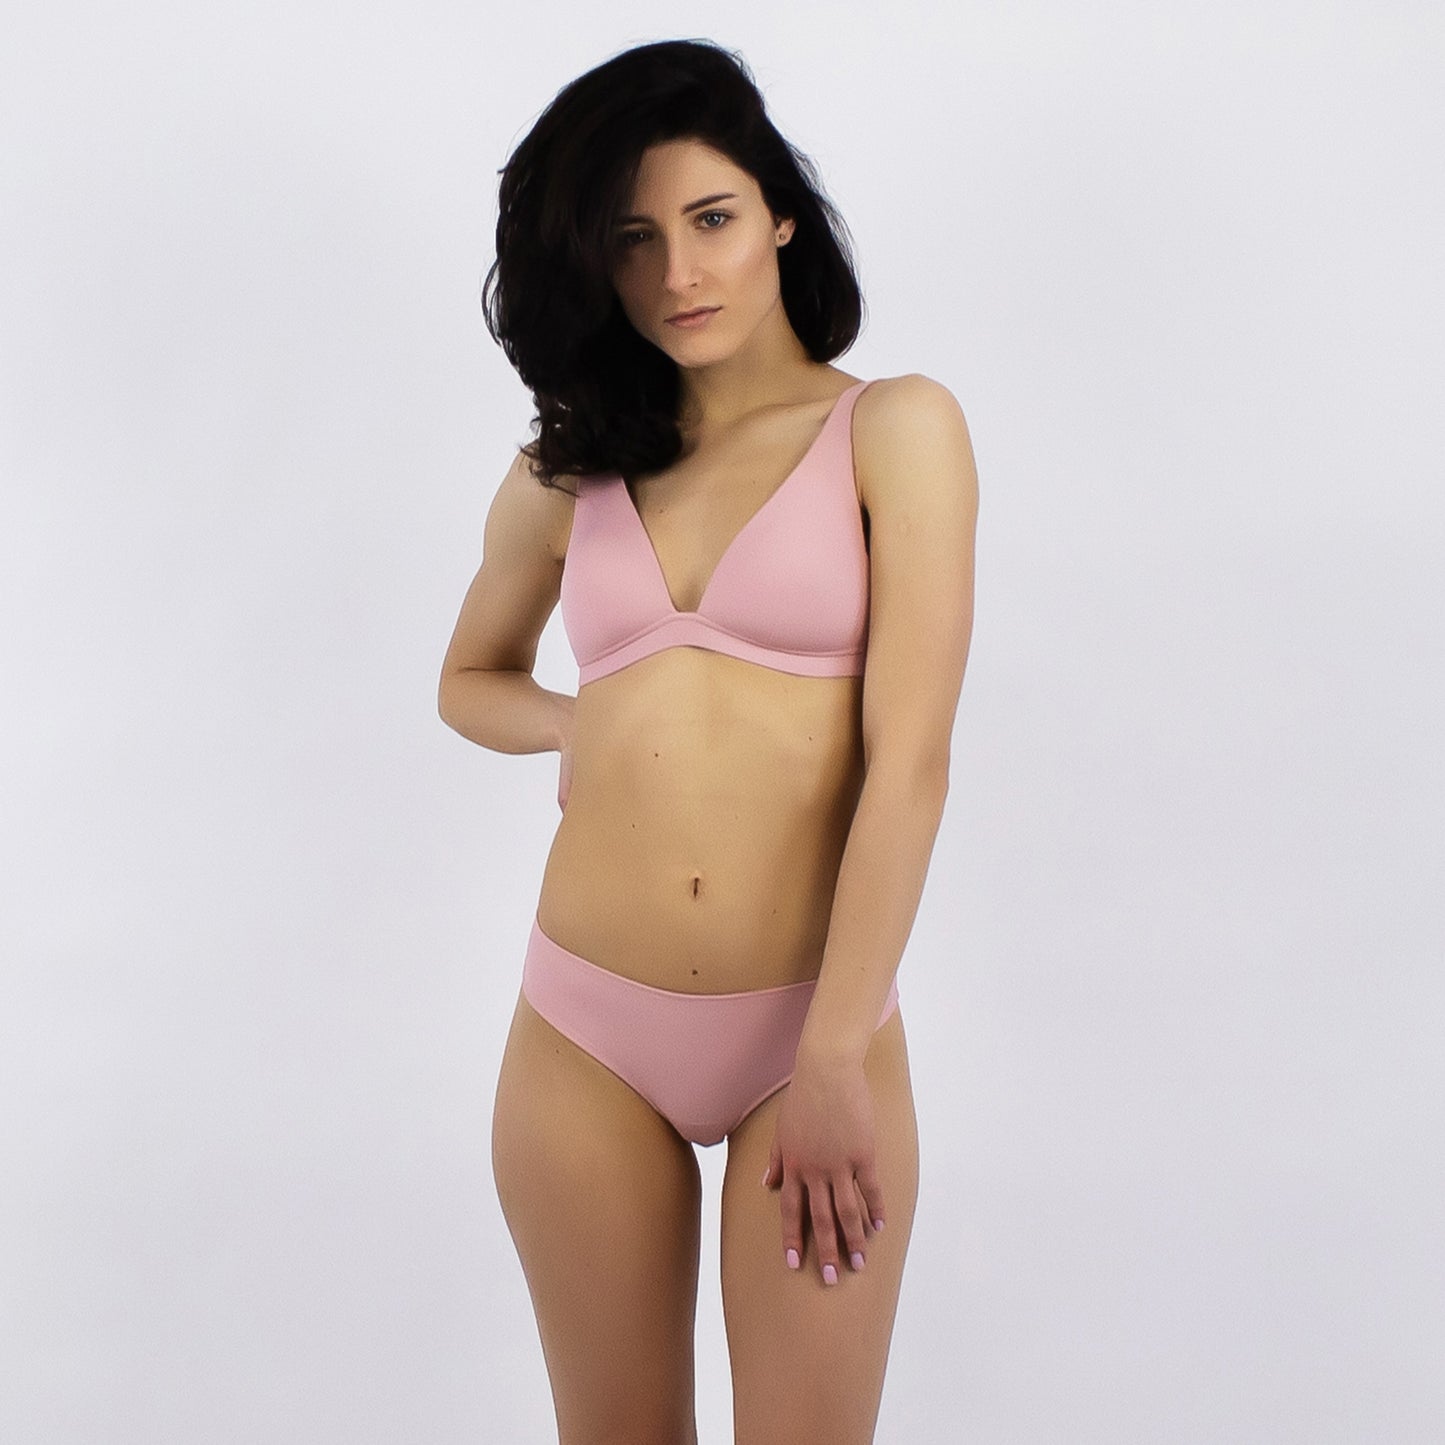 Nokaya ULTRA pink bikini. Smooth finish from out front and back.